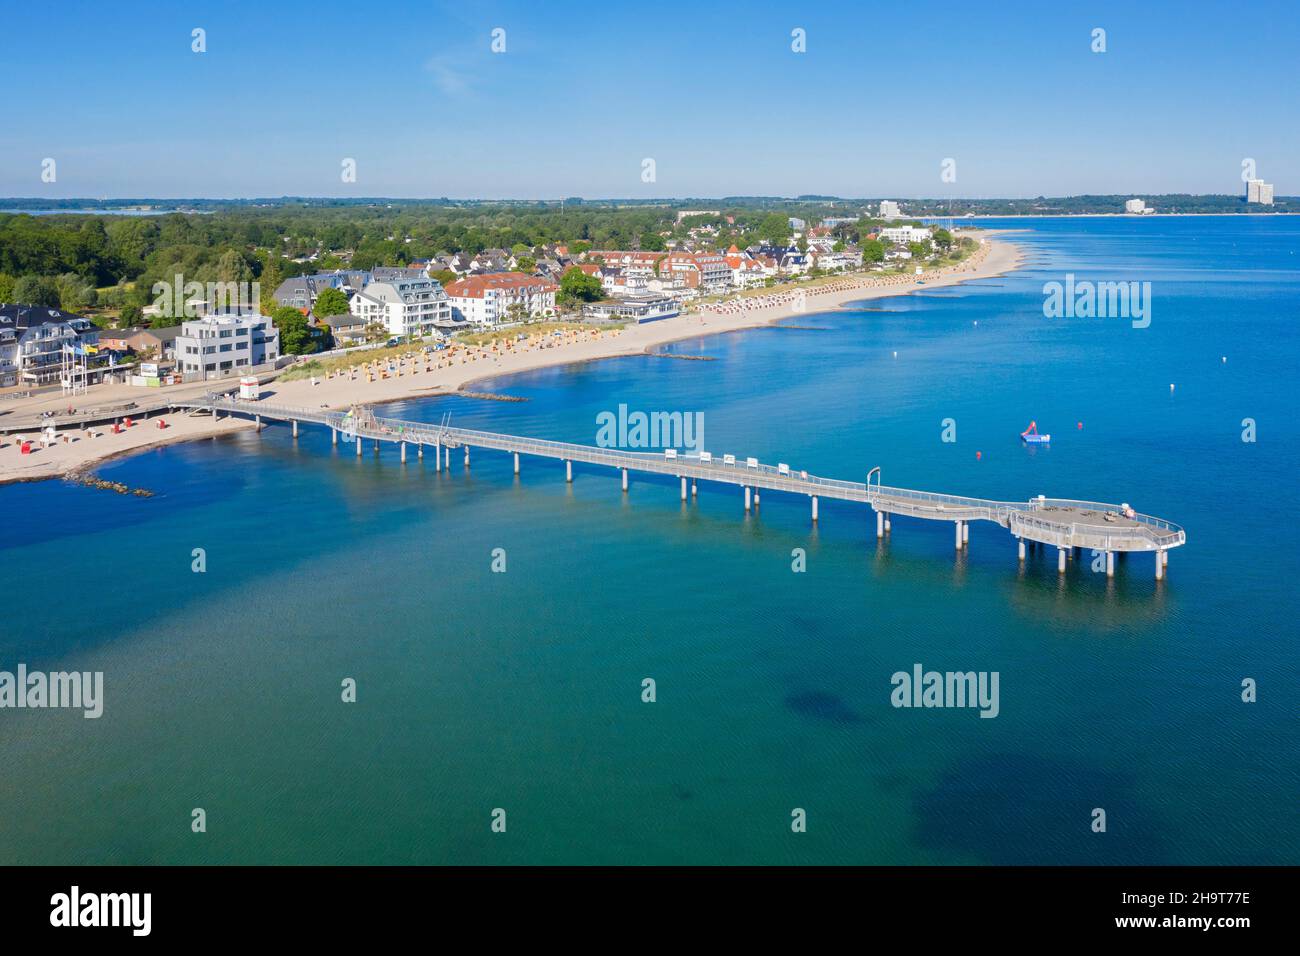 Aerial view over wooden pleasure pier and hotels at seaside resort Niendorf along the Baltic Sea, Timmendorfer Strand, Schleswig-Holstein, Germany Stock Photo